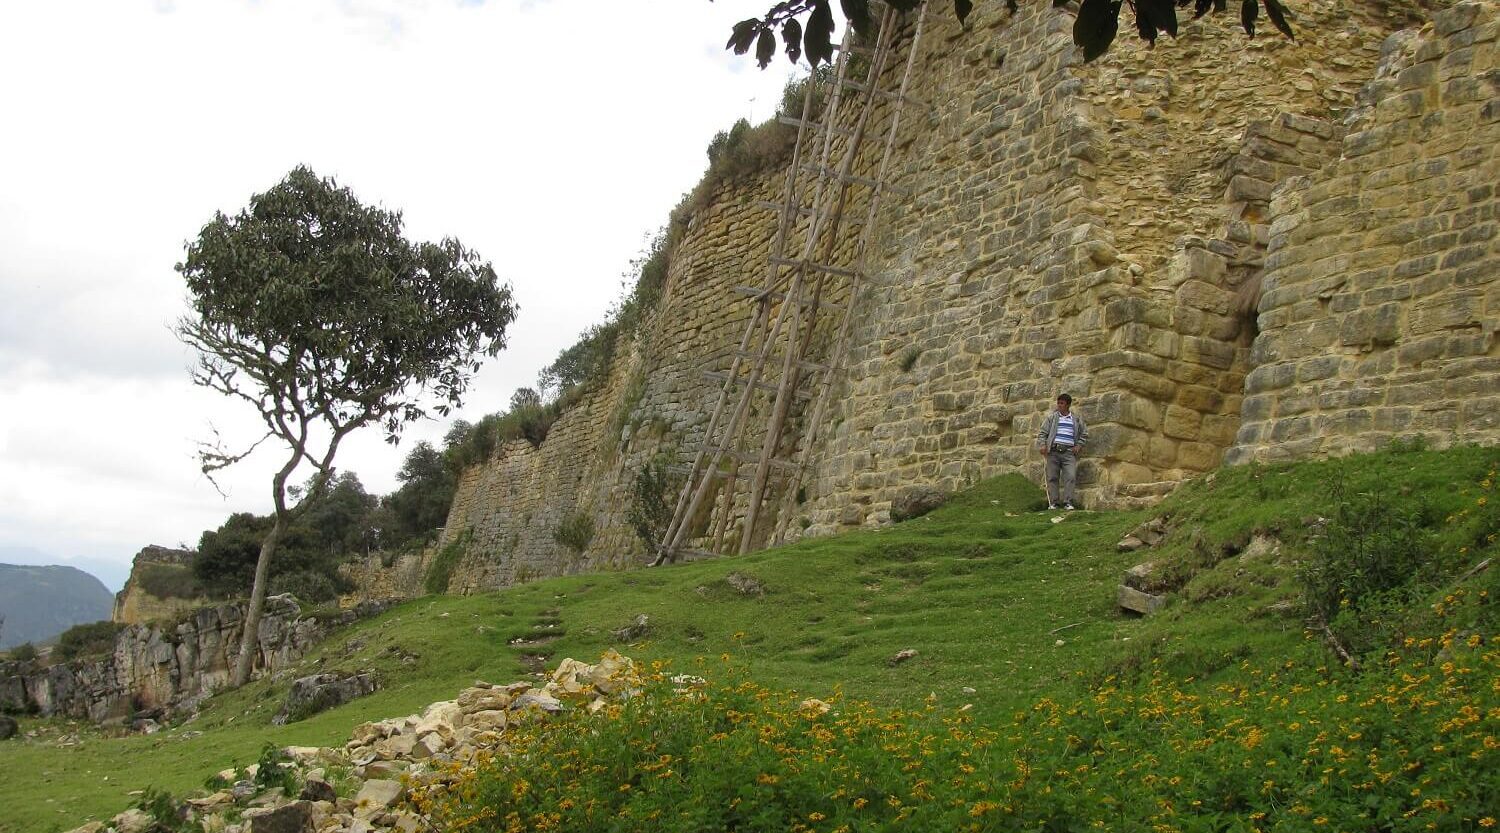 The citadel of Kuelap in the Chachapoyas area - RESPONSible Travel Peru